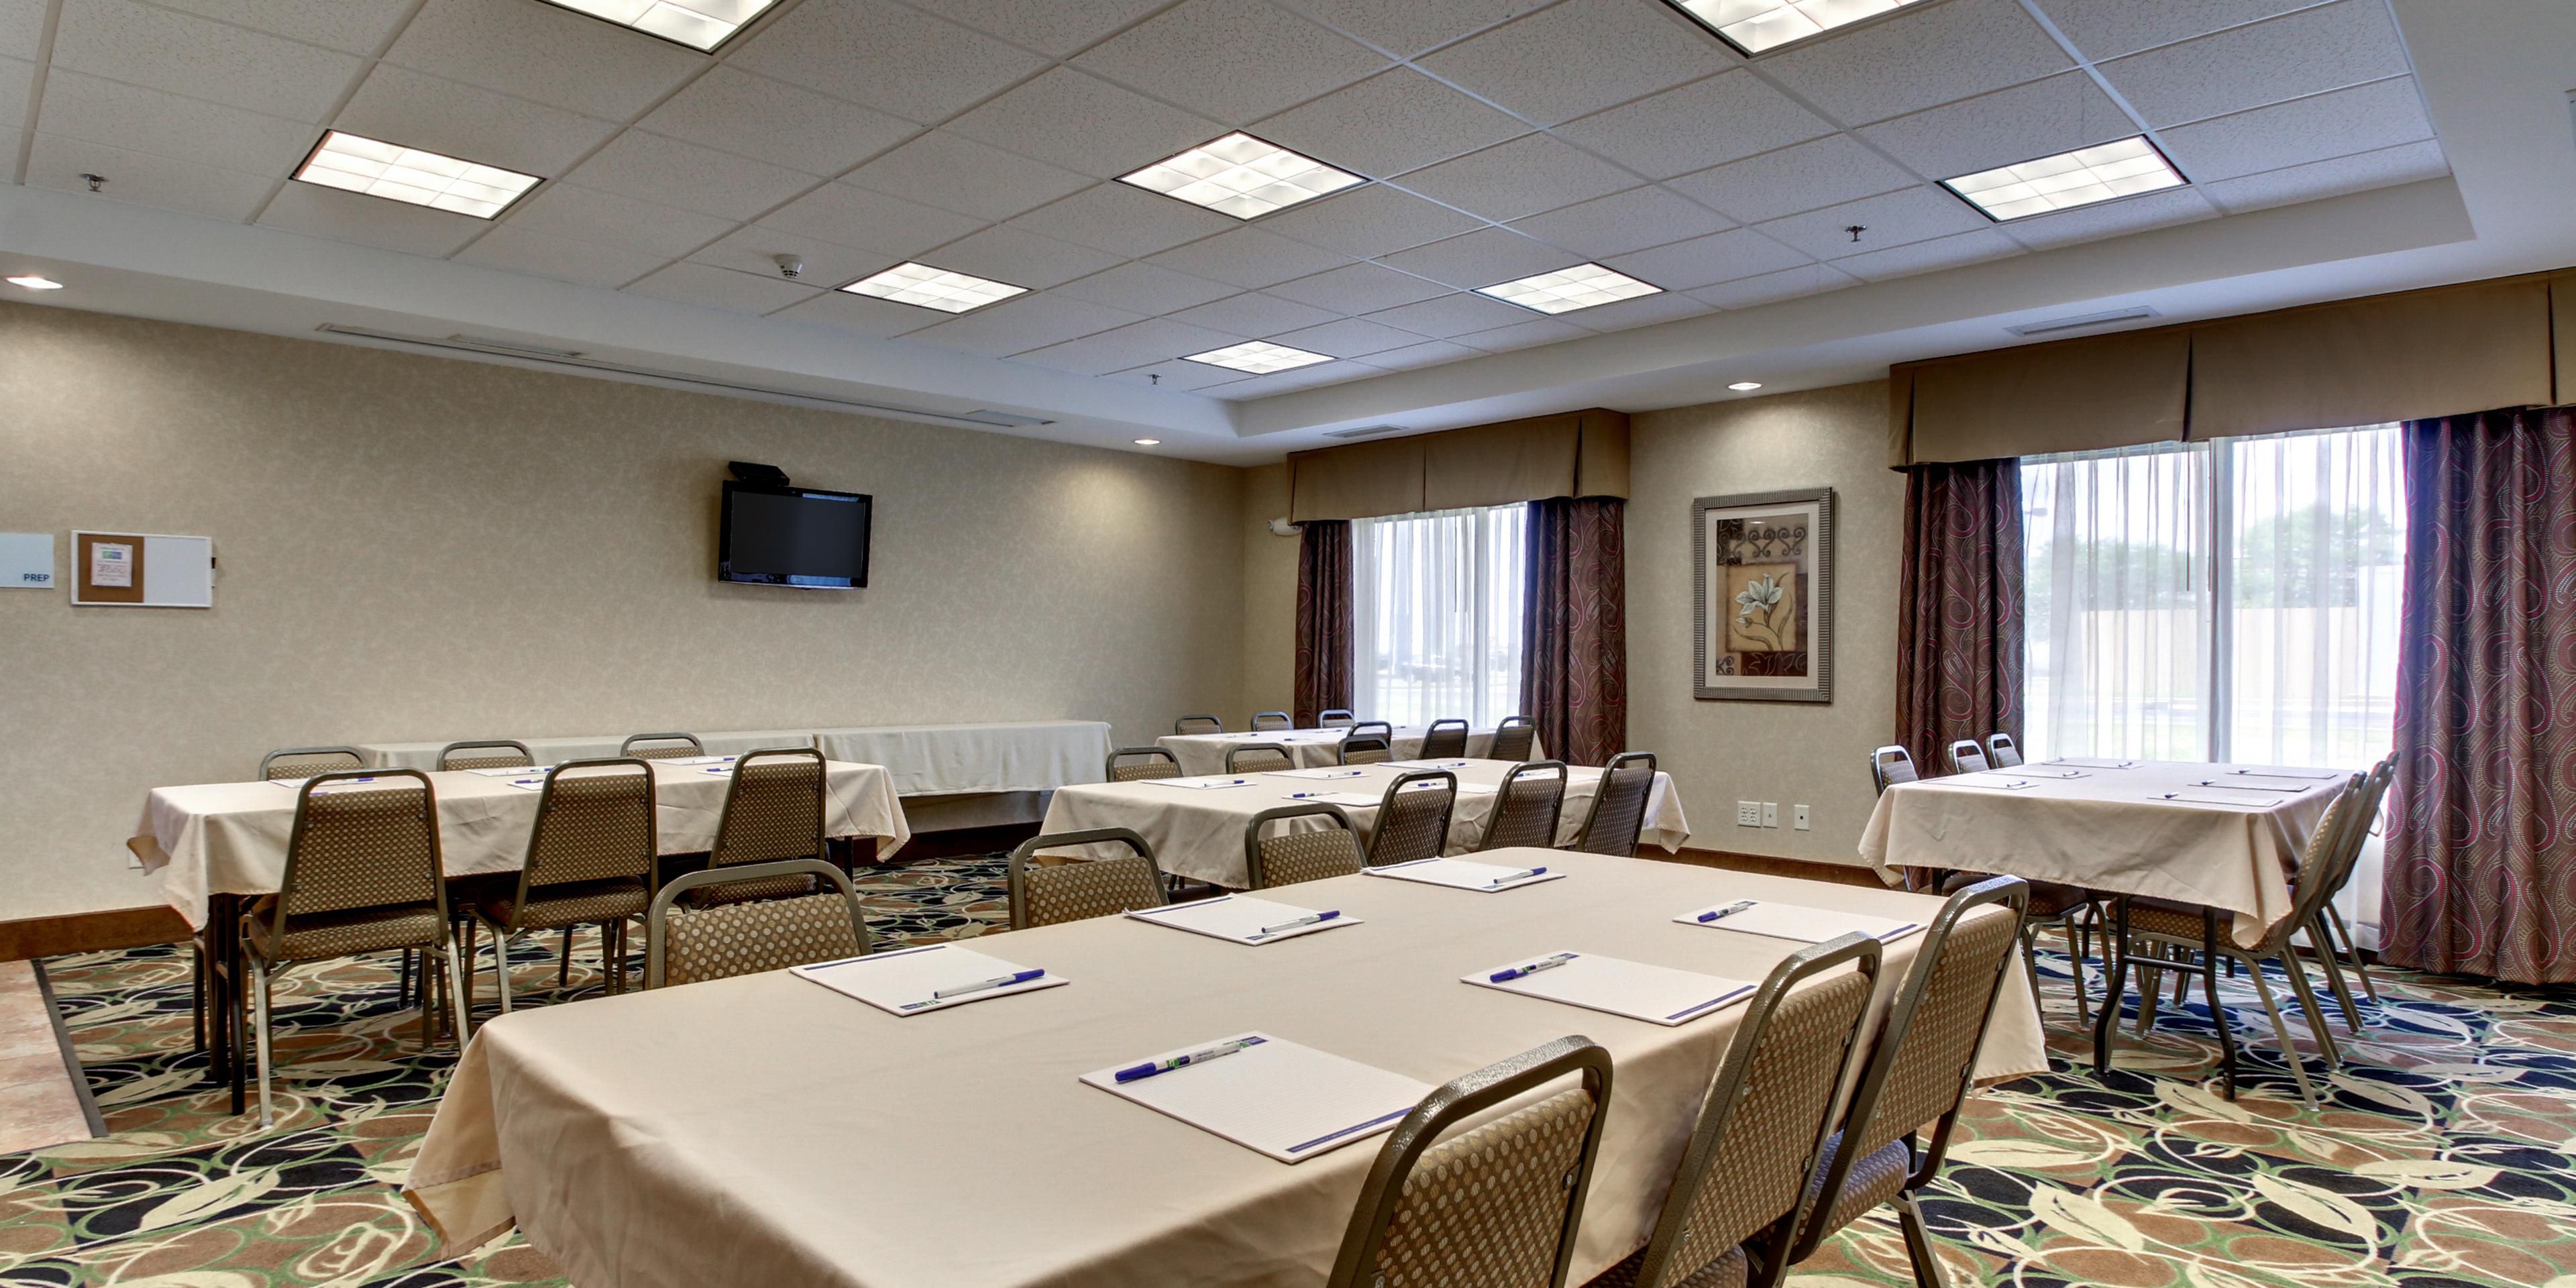 Host a small meeting or event in our 636 sq. ft. event space with a flat screen TV and free Wi-Fi!